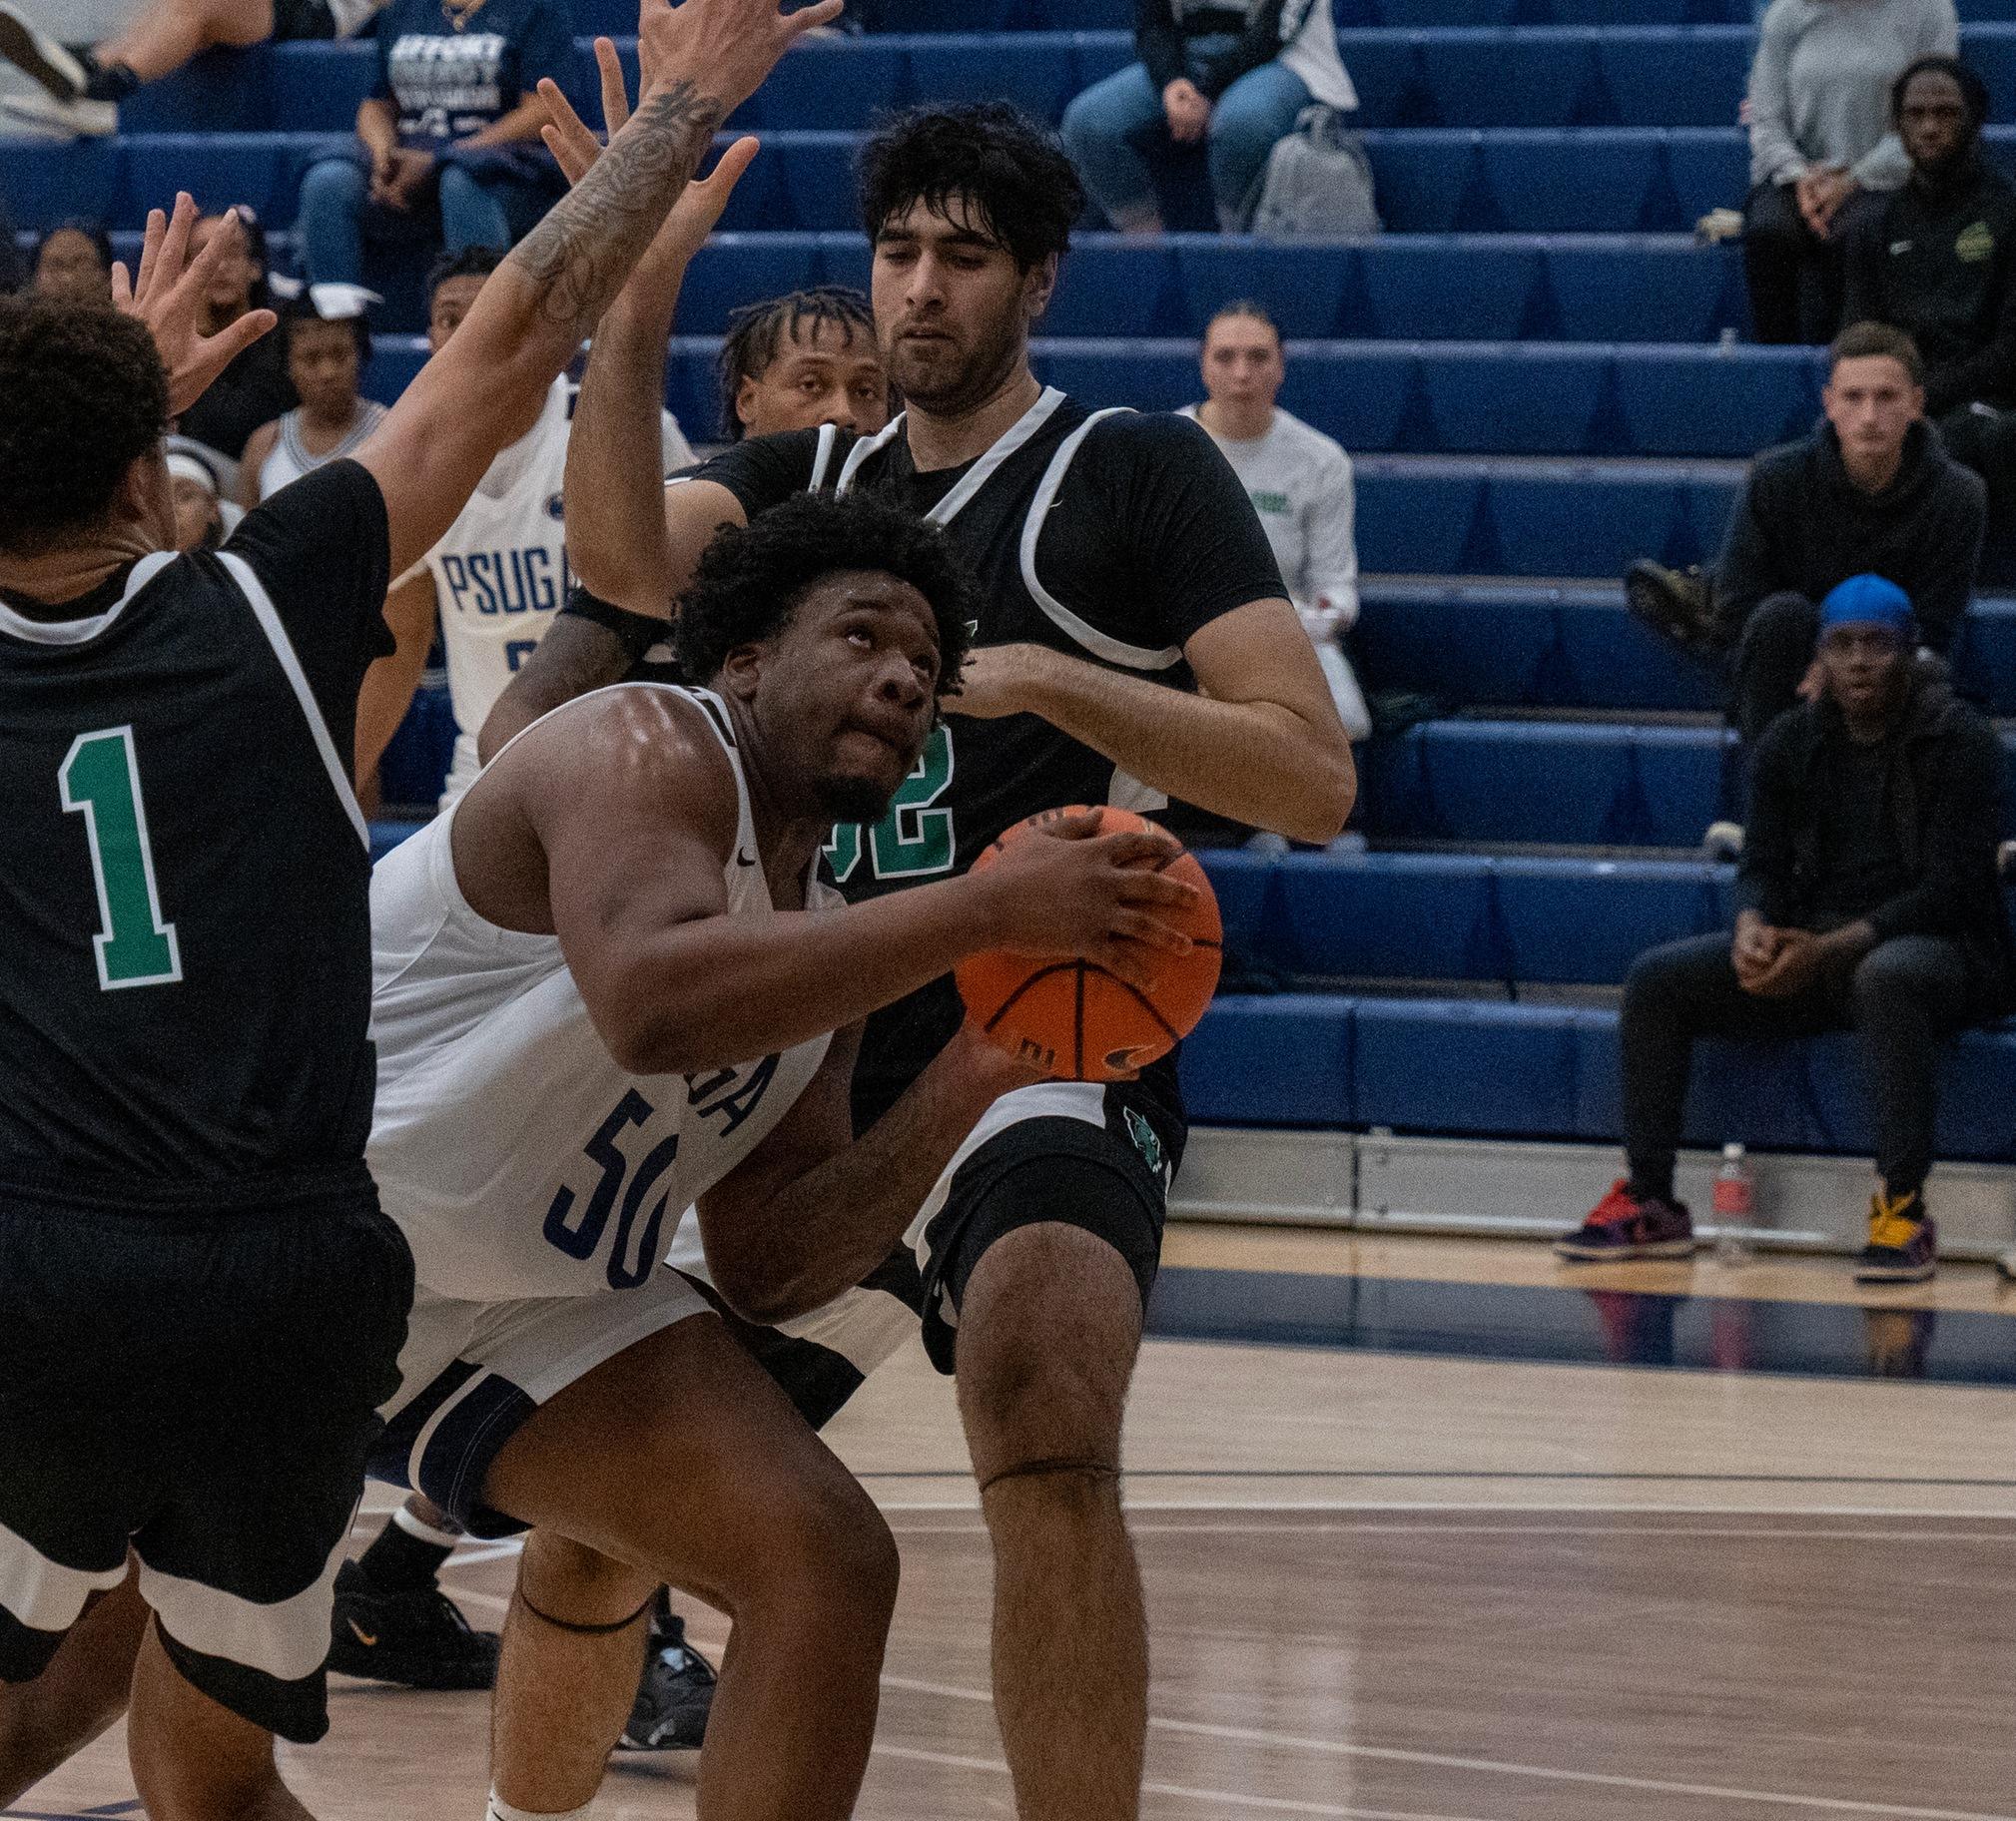 Men's Basketball Comes From 11 Down at Half to Win Important PSUAC Game